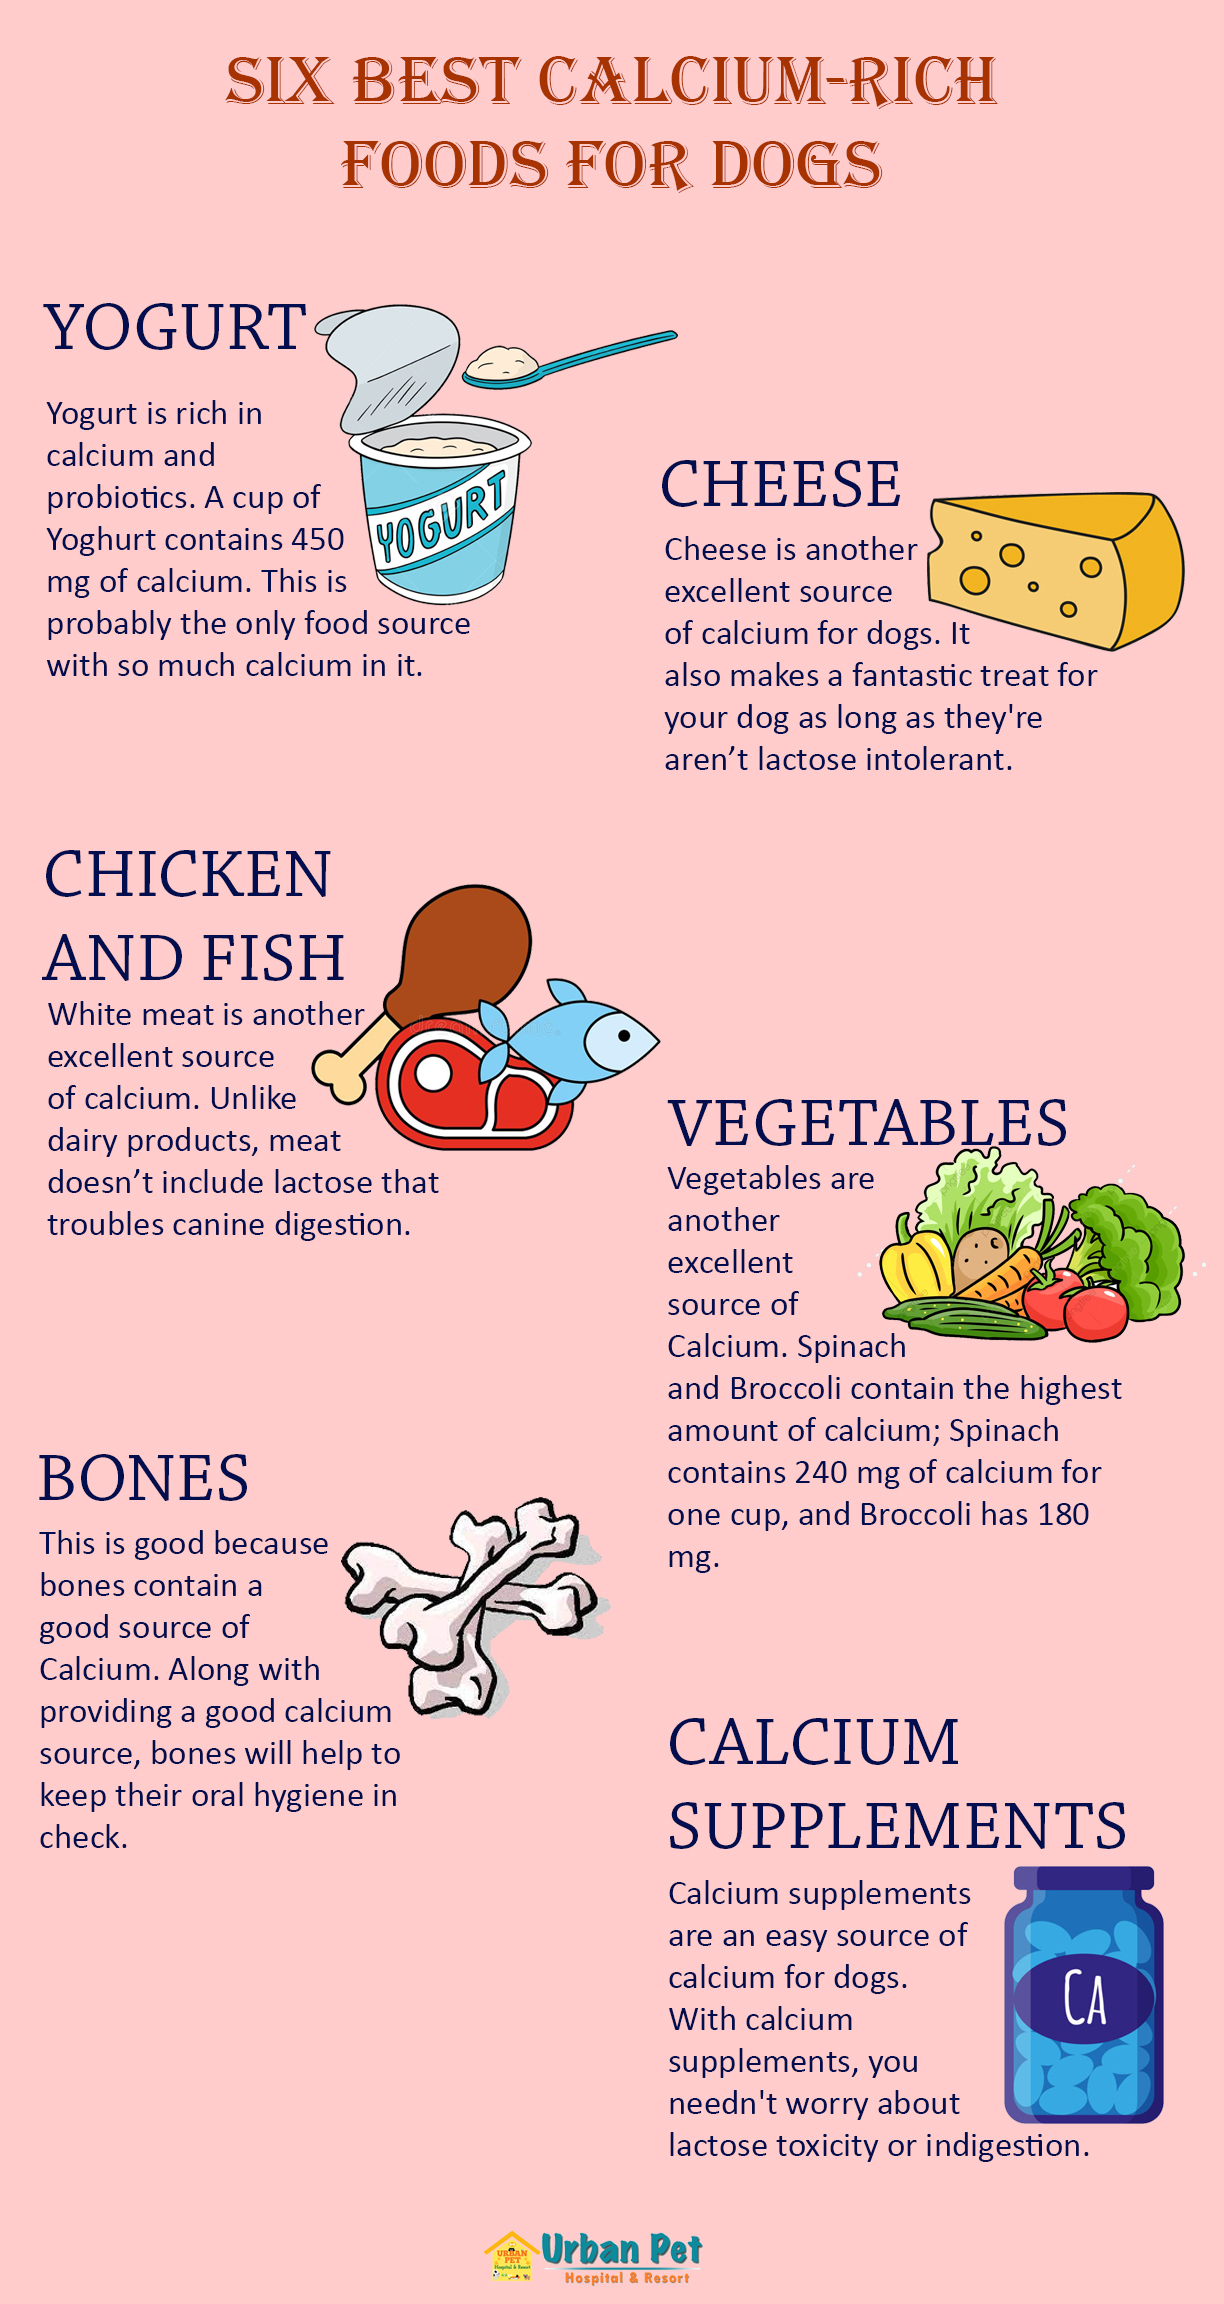 Can Dog Food Cause High Calcium Levels? 2